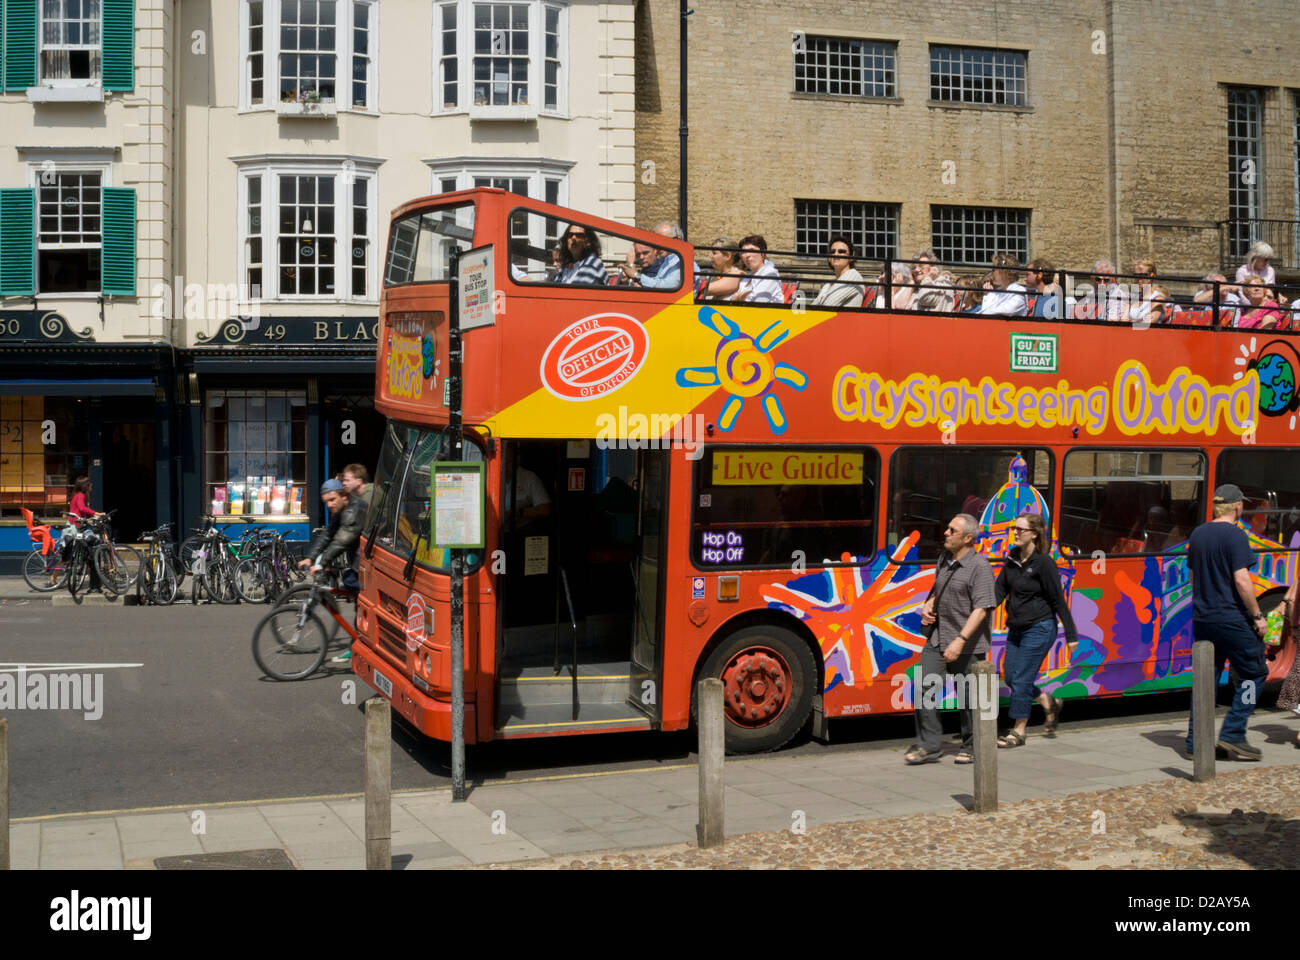 A busy Sight-seeing Tour Bus, outside Blackwell's bookshop, Broad Street, Oxford, Oxfordshire, England, UK Stock Photo